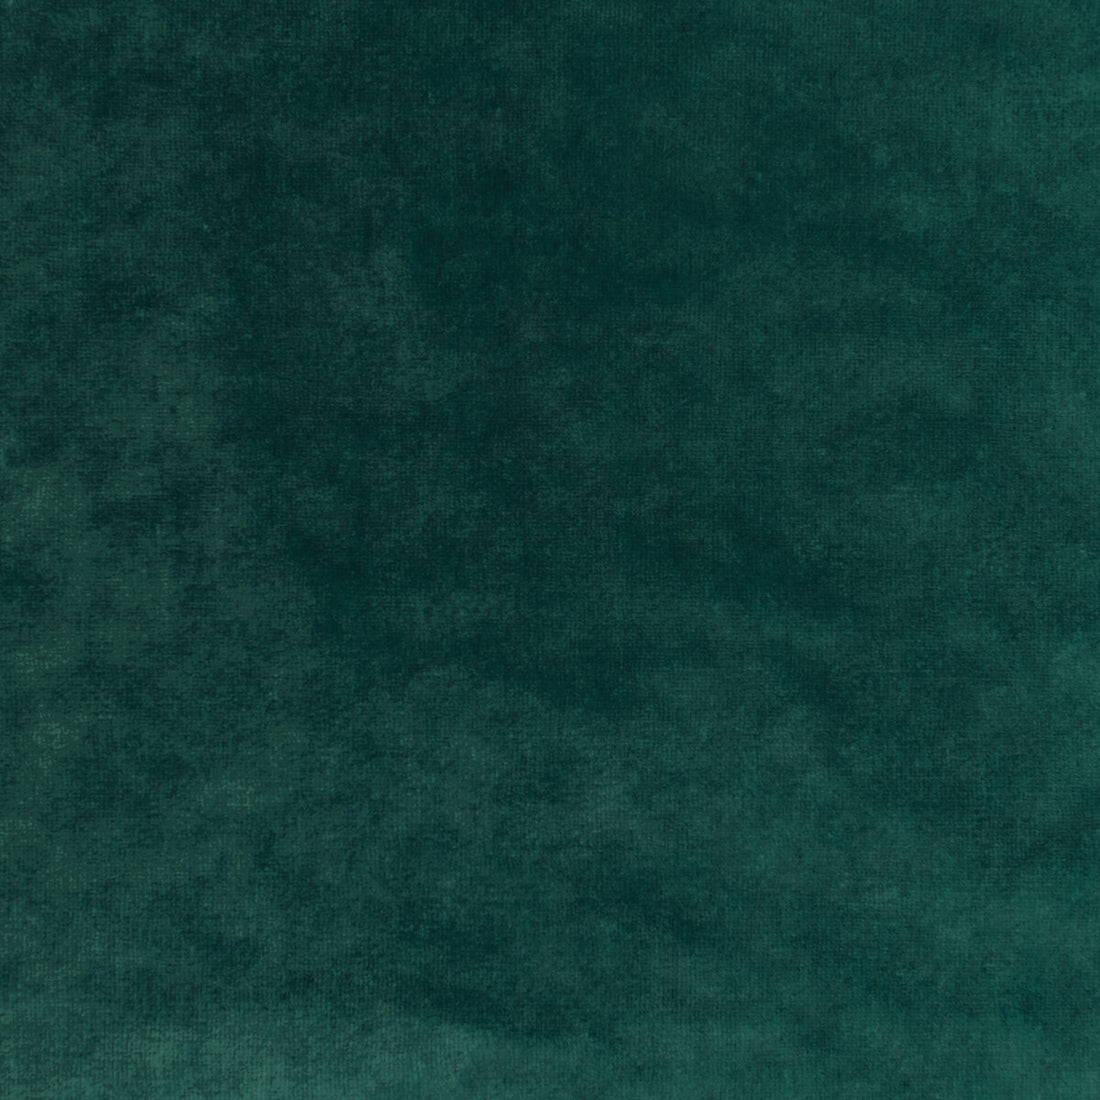 Regal Velvet fabric in teal color - pattern 36064.35.0 - by Kravet Couture